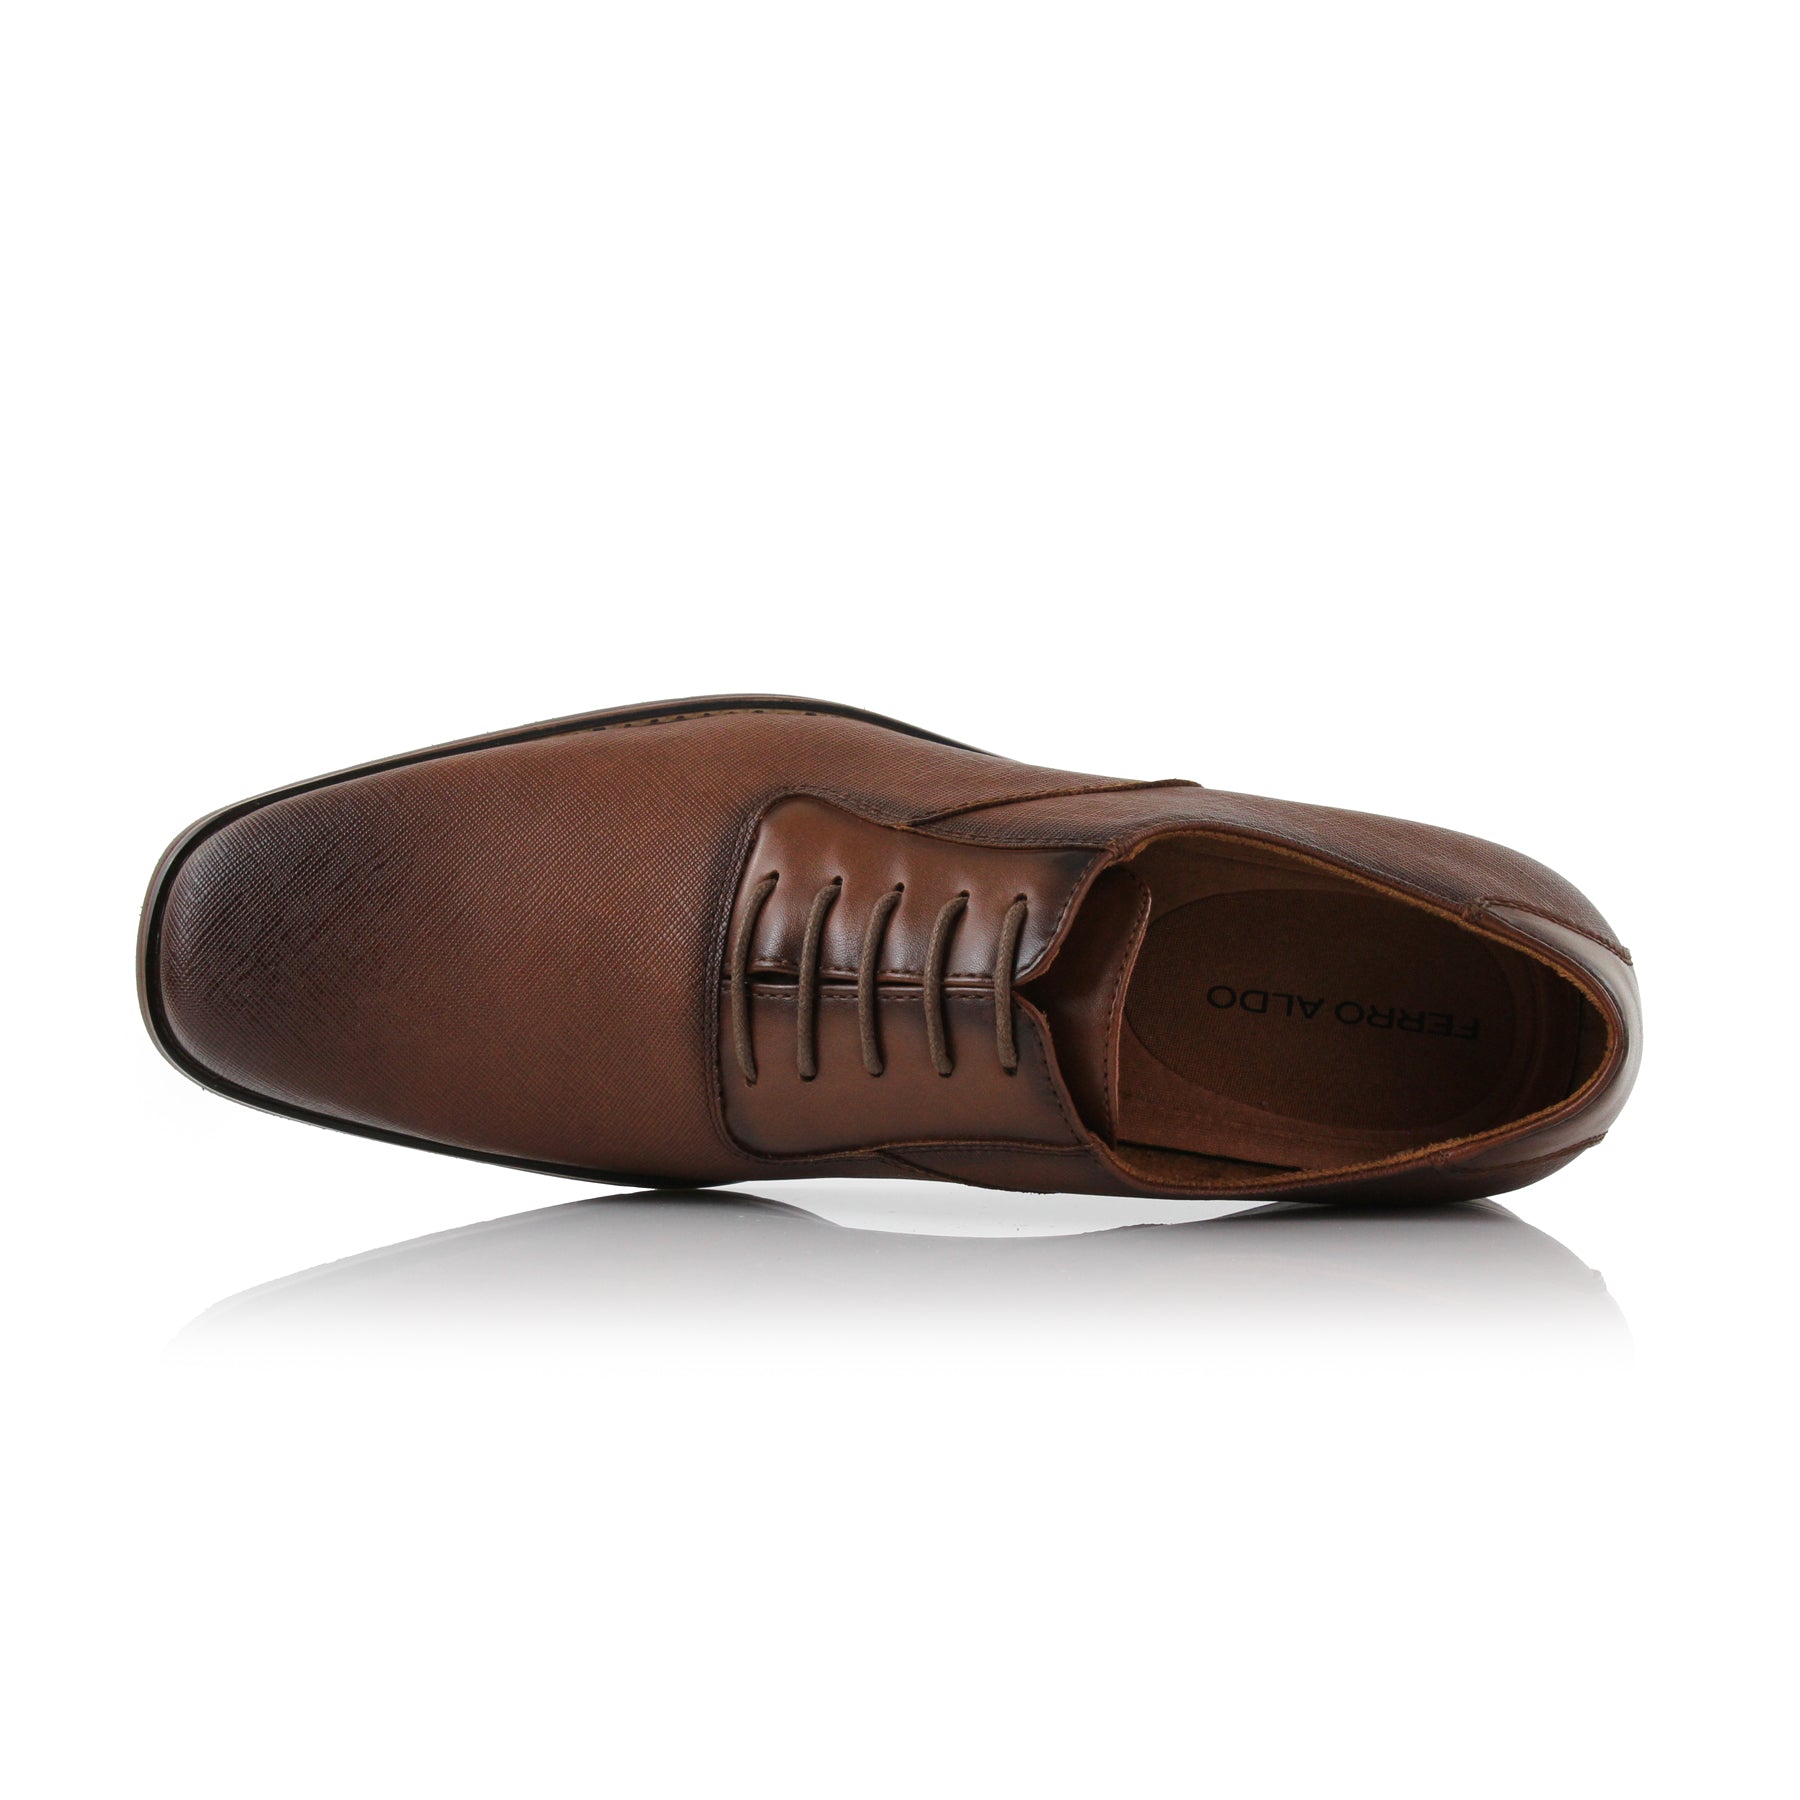 Embossed Oxford Shoes | Javier by Ferro Aldo | Conal Footwear | Top-Down Angle View